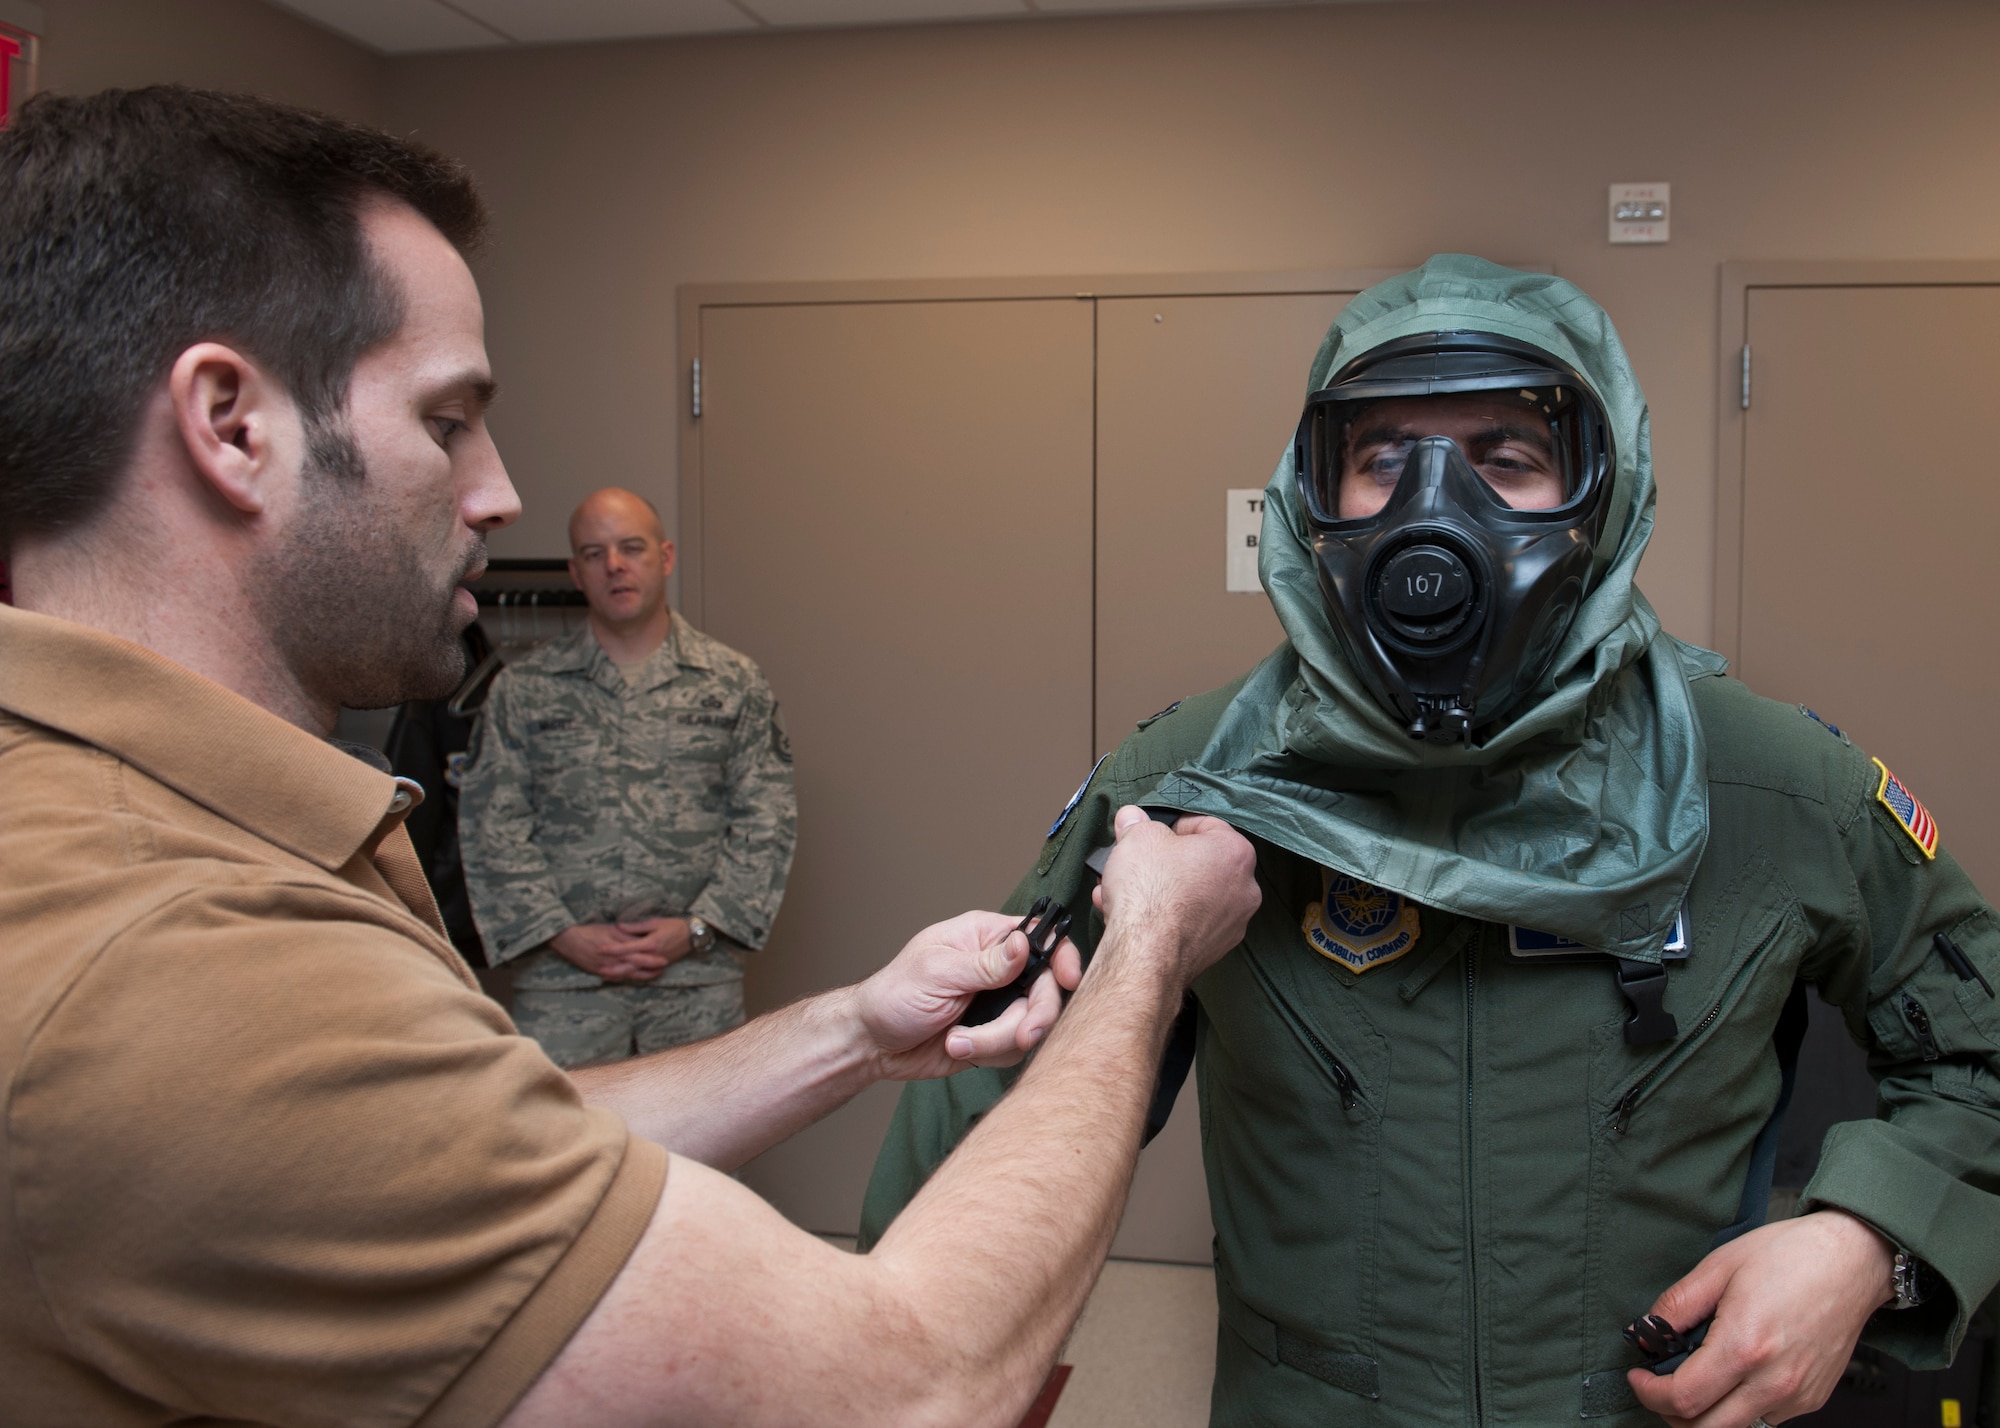 Capt. Edward Silva, 436th Operations Support Squadron Aircrew Flight Equipment commander, puts on the XM69 Aircrew Chemical, Biological, Radiological and Nuclear Defense (CBRN) system and is assisted by Steve Leadore, Joint Service Aircrew Strategic Program team test analyst, March 2, 2016, inside the Aircrew Flight Equipment facility on Dover Air Force Base, Del. The Air Force, Army, Navy and Marine Corps all utilize their own unique aircrew CBRN system. The XM69 is being developed as a single system that will be utilized by all four branches. (U.S. Air Force photo/Senior Airman Zachary Cacicia)